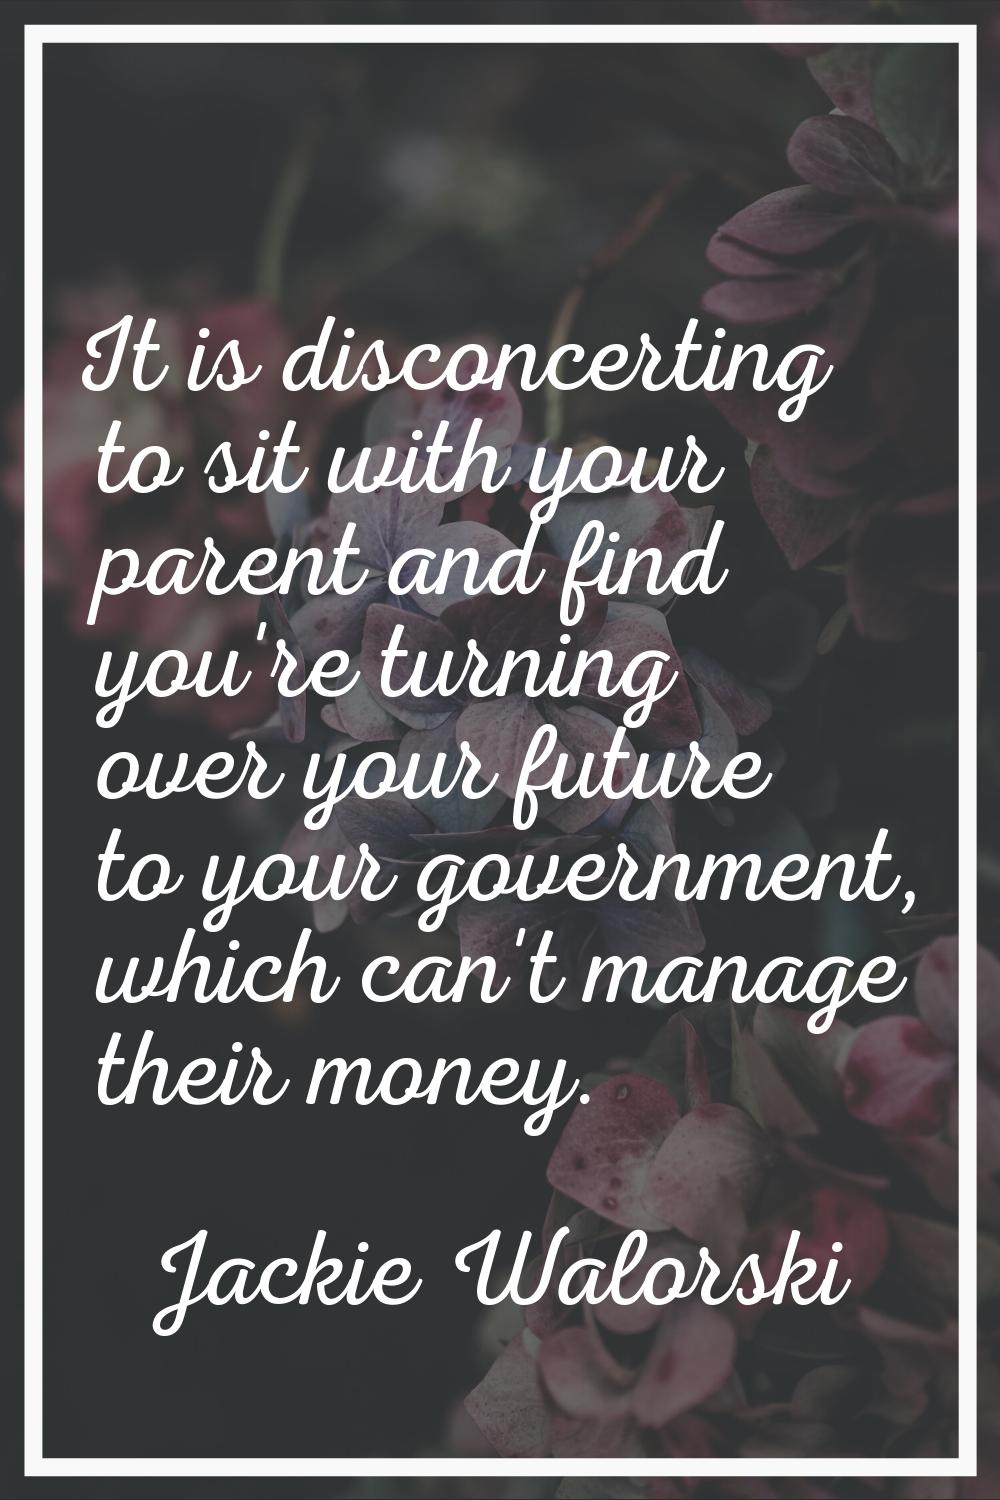 It is disconcerting to sit with your parent and find you're turning over your future to your govern